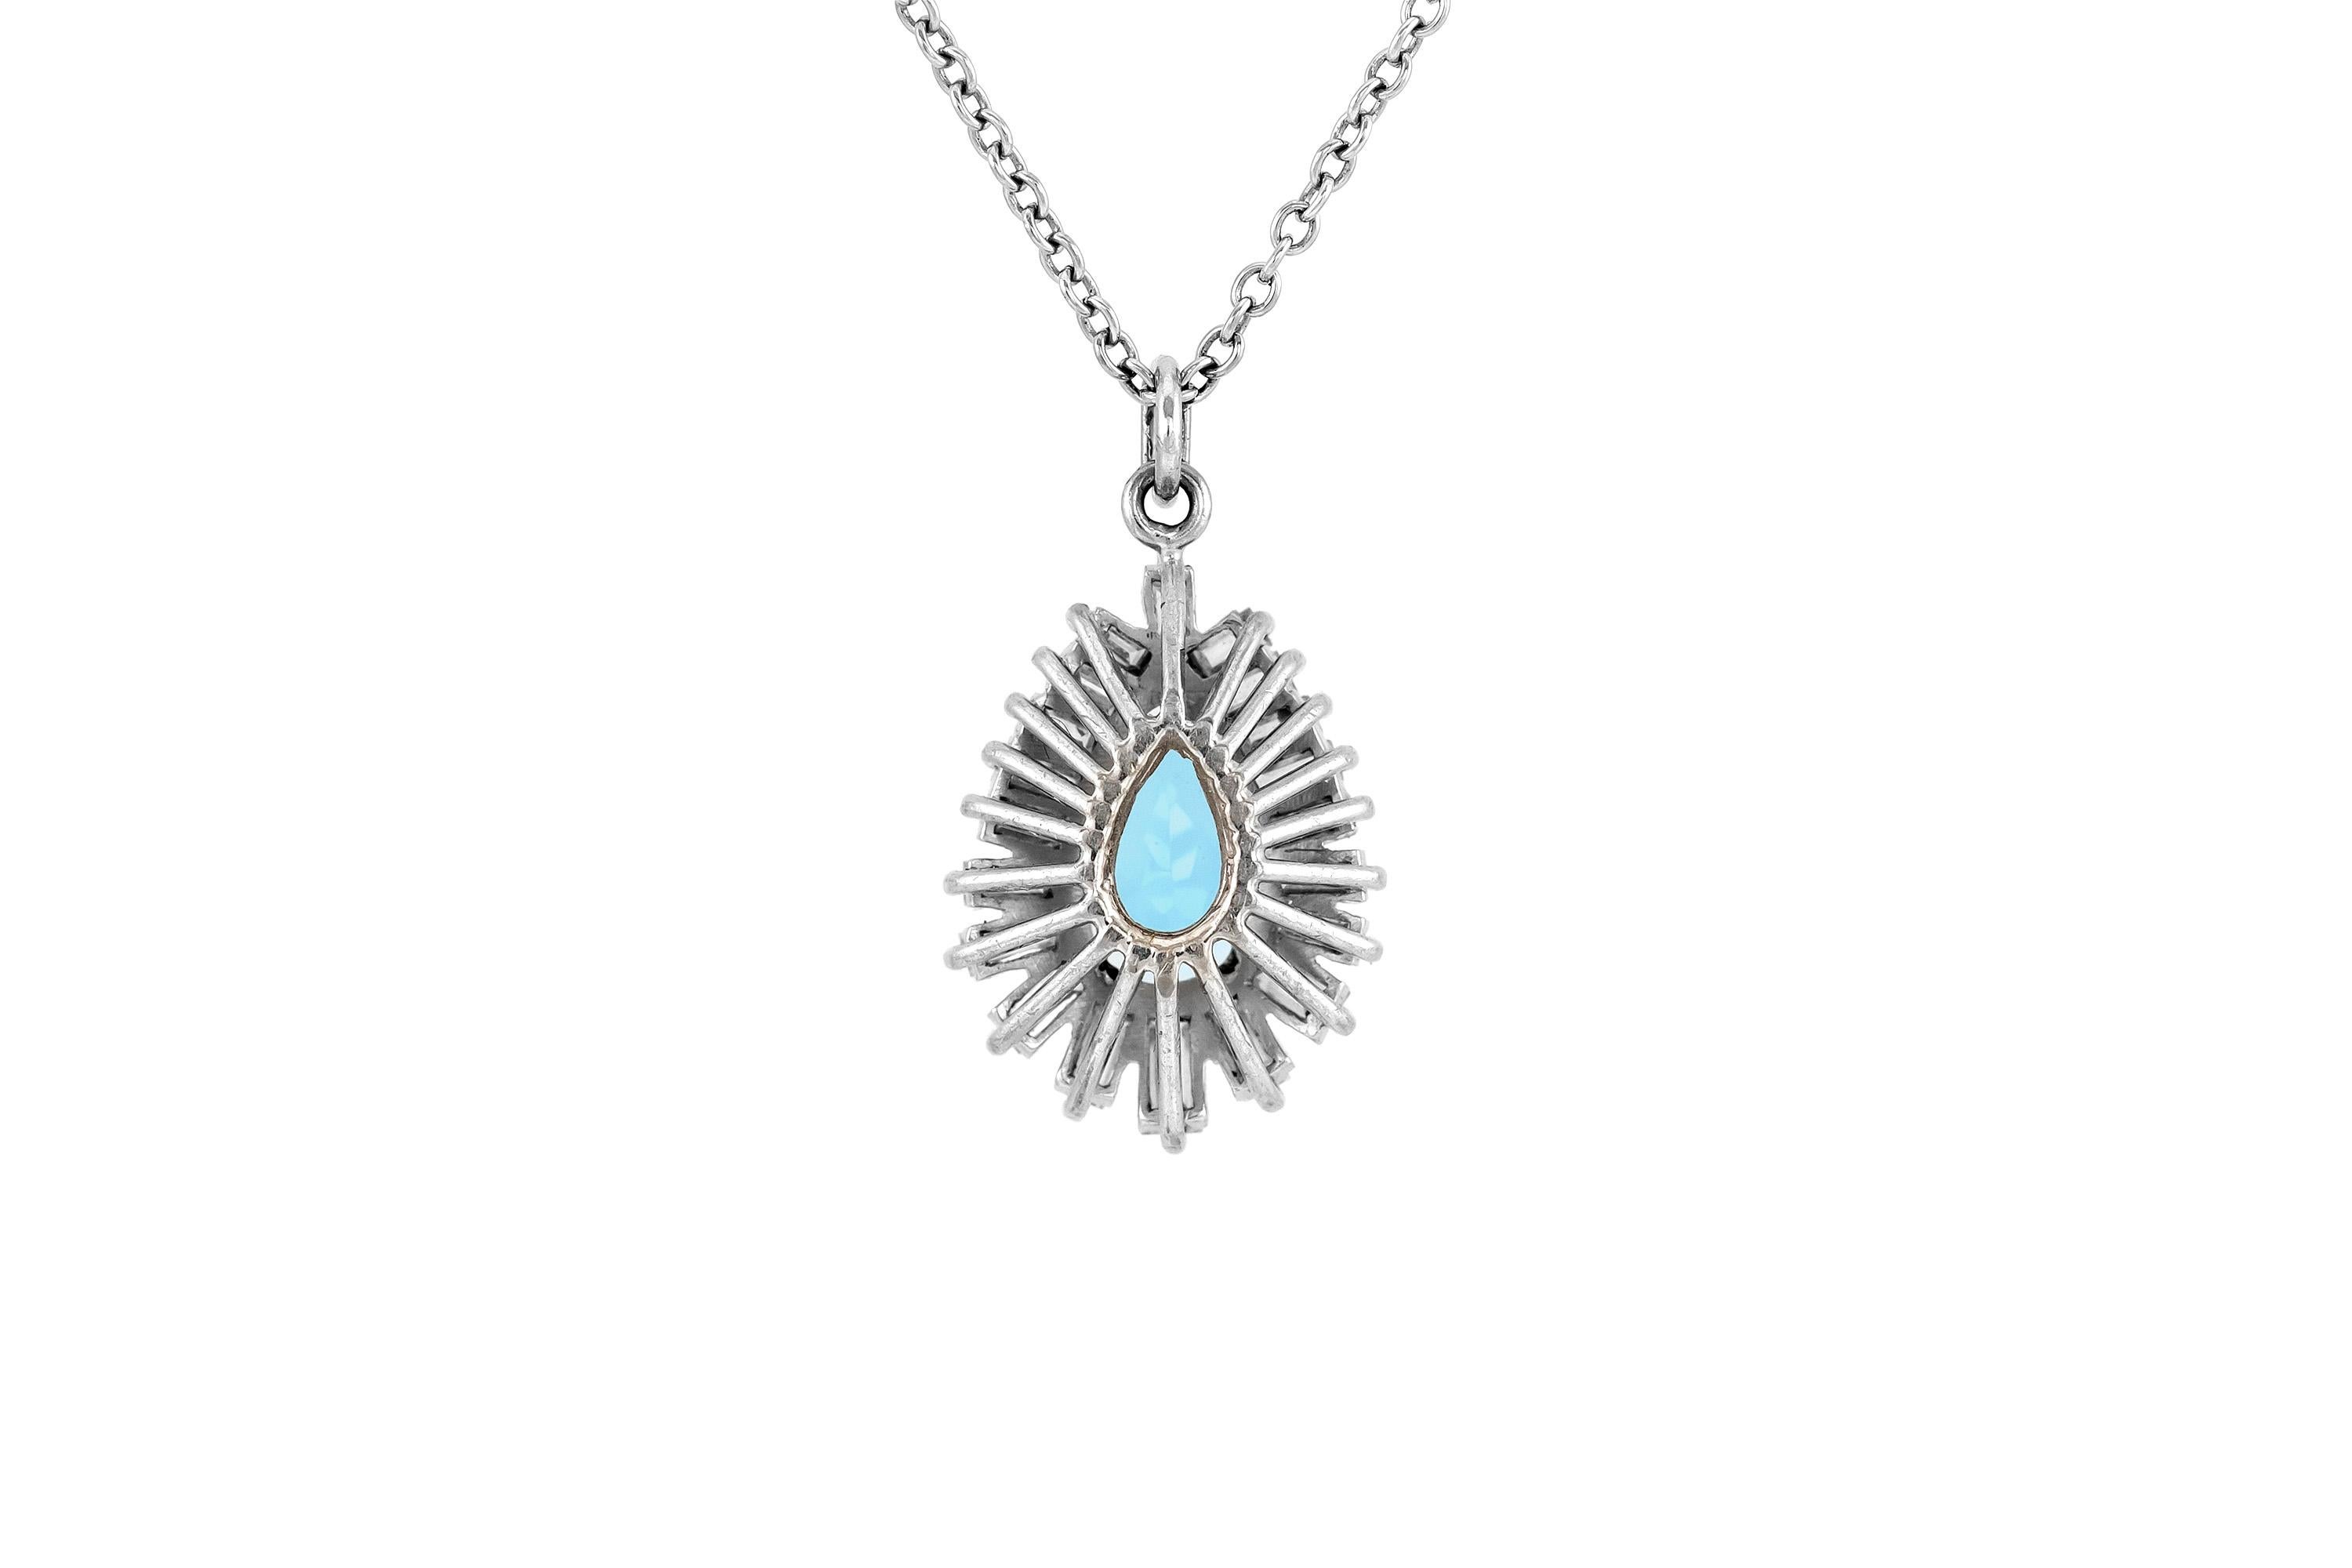 The pendant and necklace are finely crafted in 18k and 14k, with diamonds weighing a total of 1.50 dwt. Circa 1960.